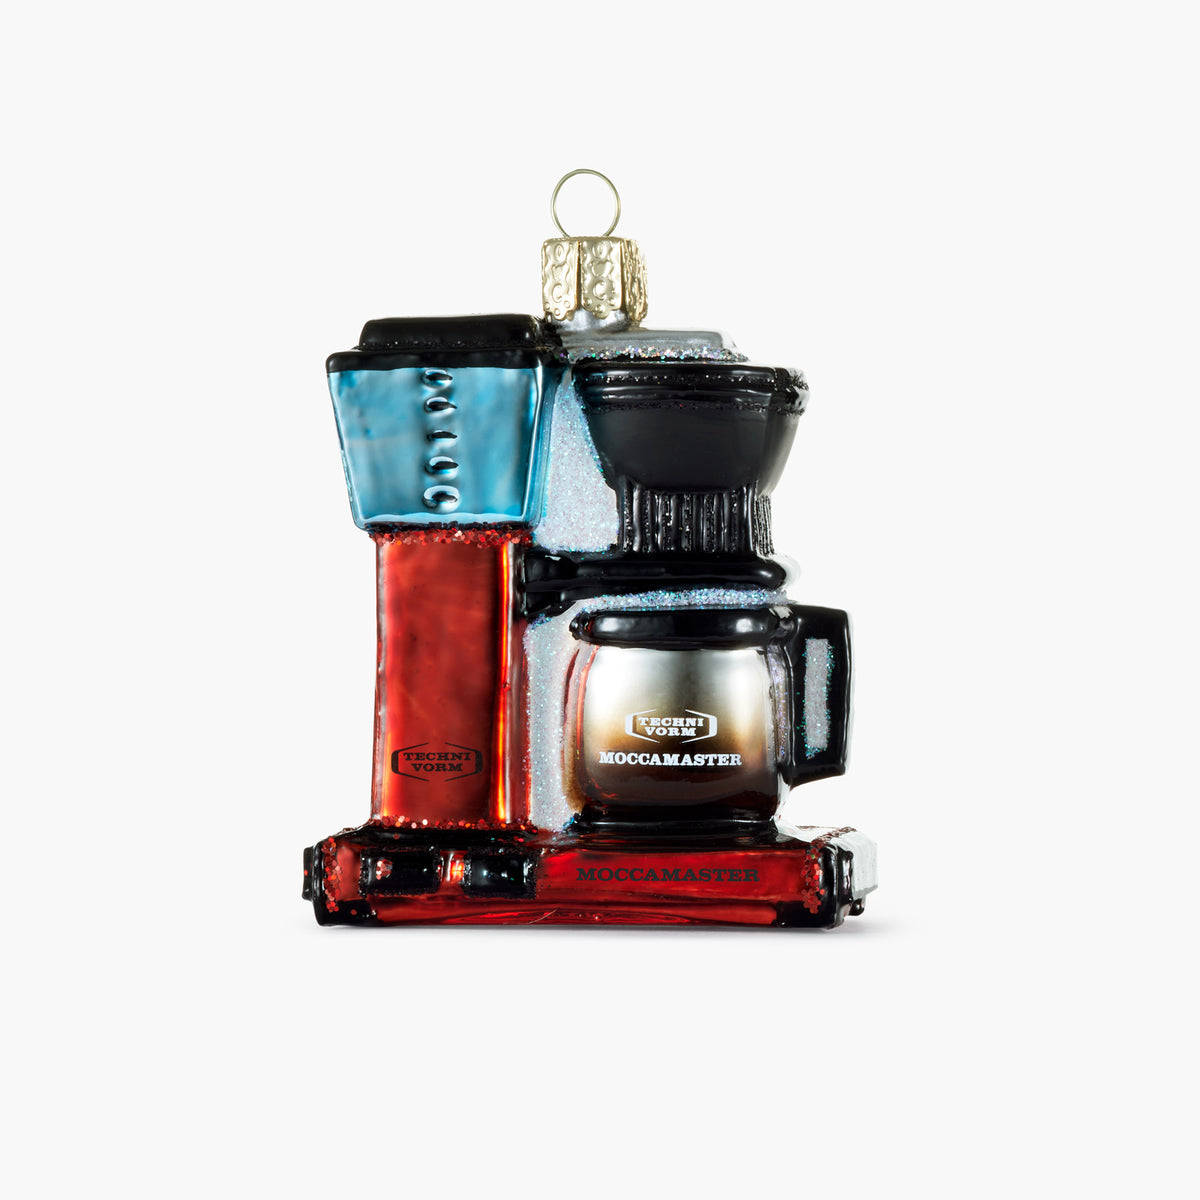 Moccamaster Coffee Brewer Ornament